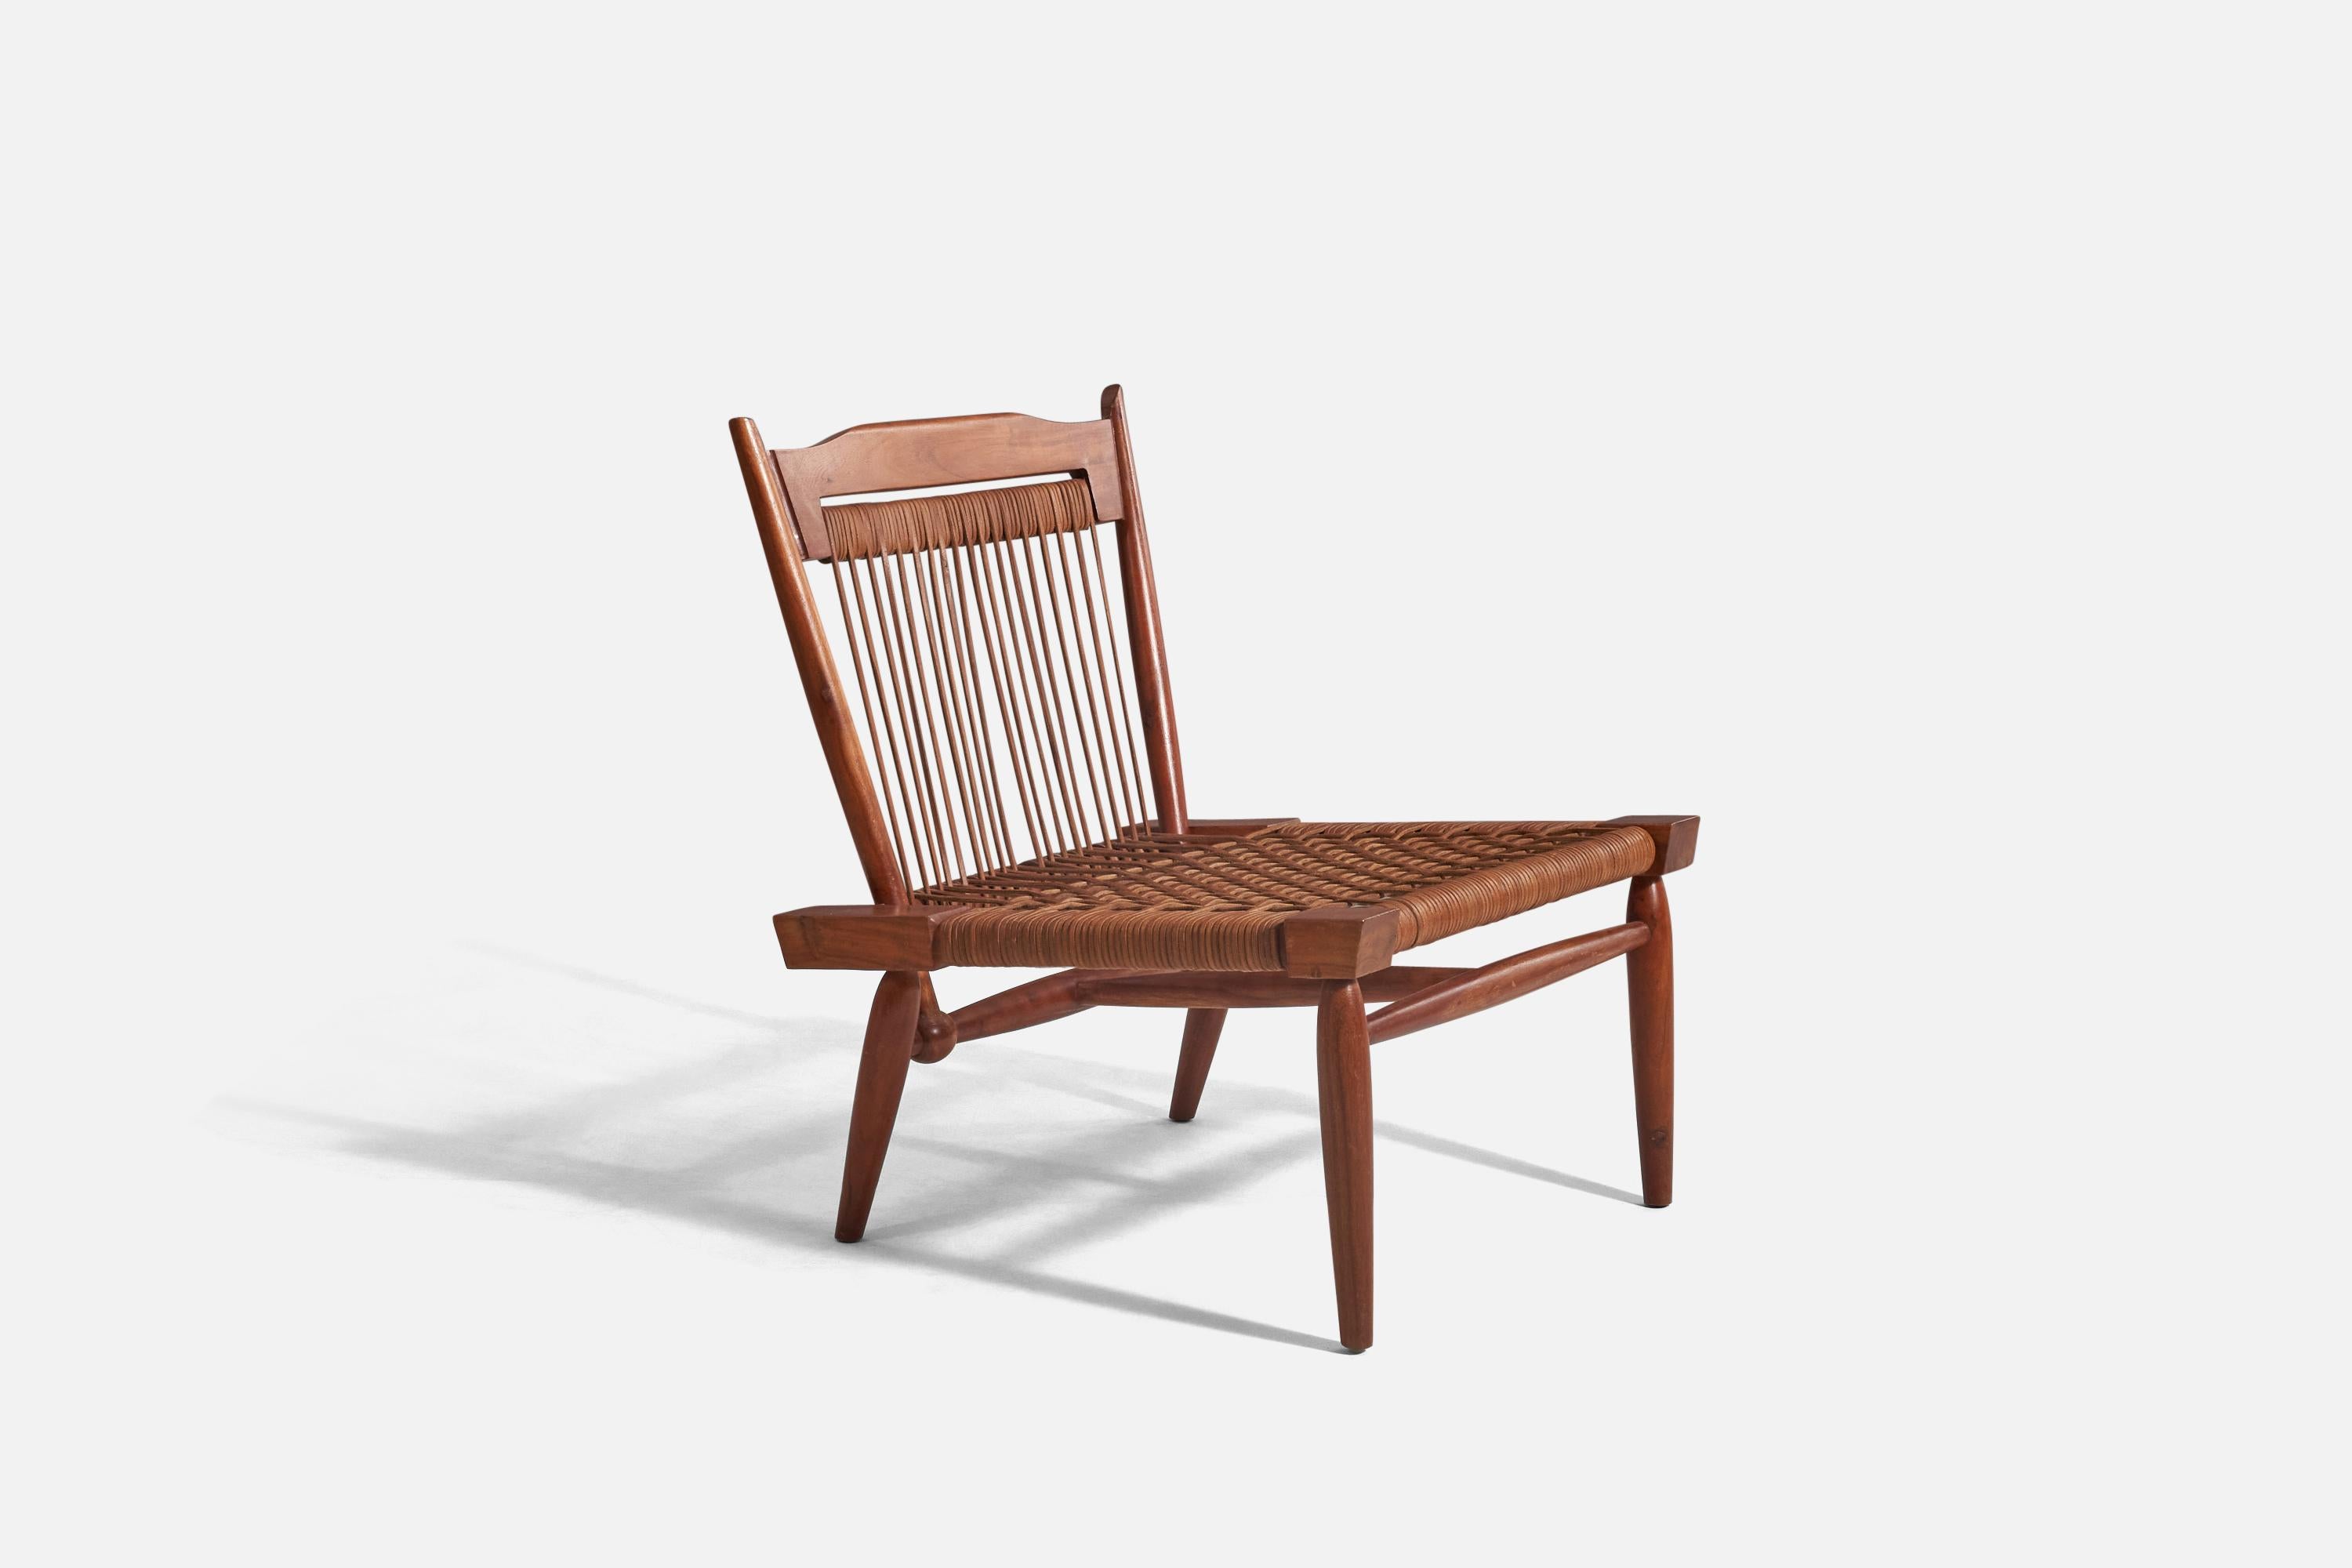 A walnut and cane lounge chair designed and produced by an American designer, United States, 1960s.






